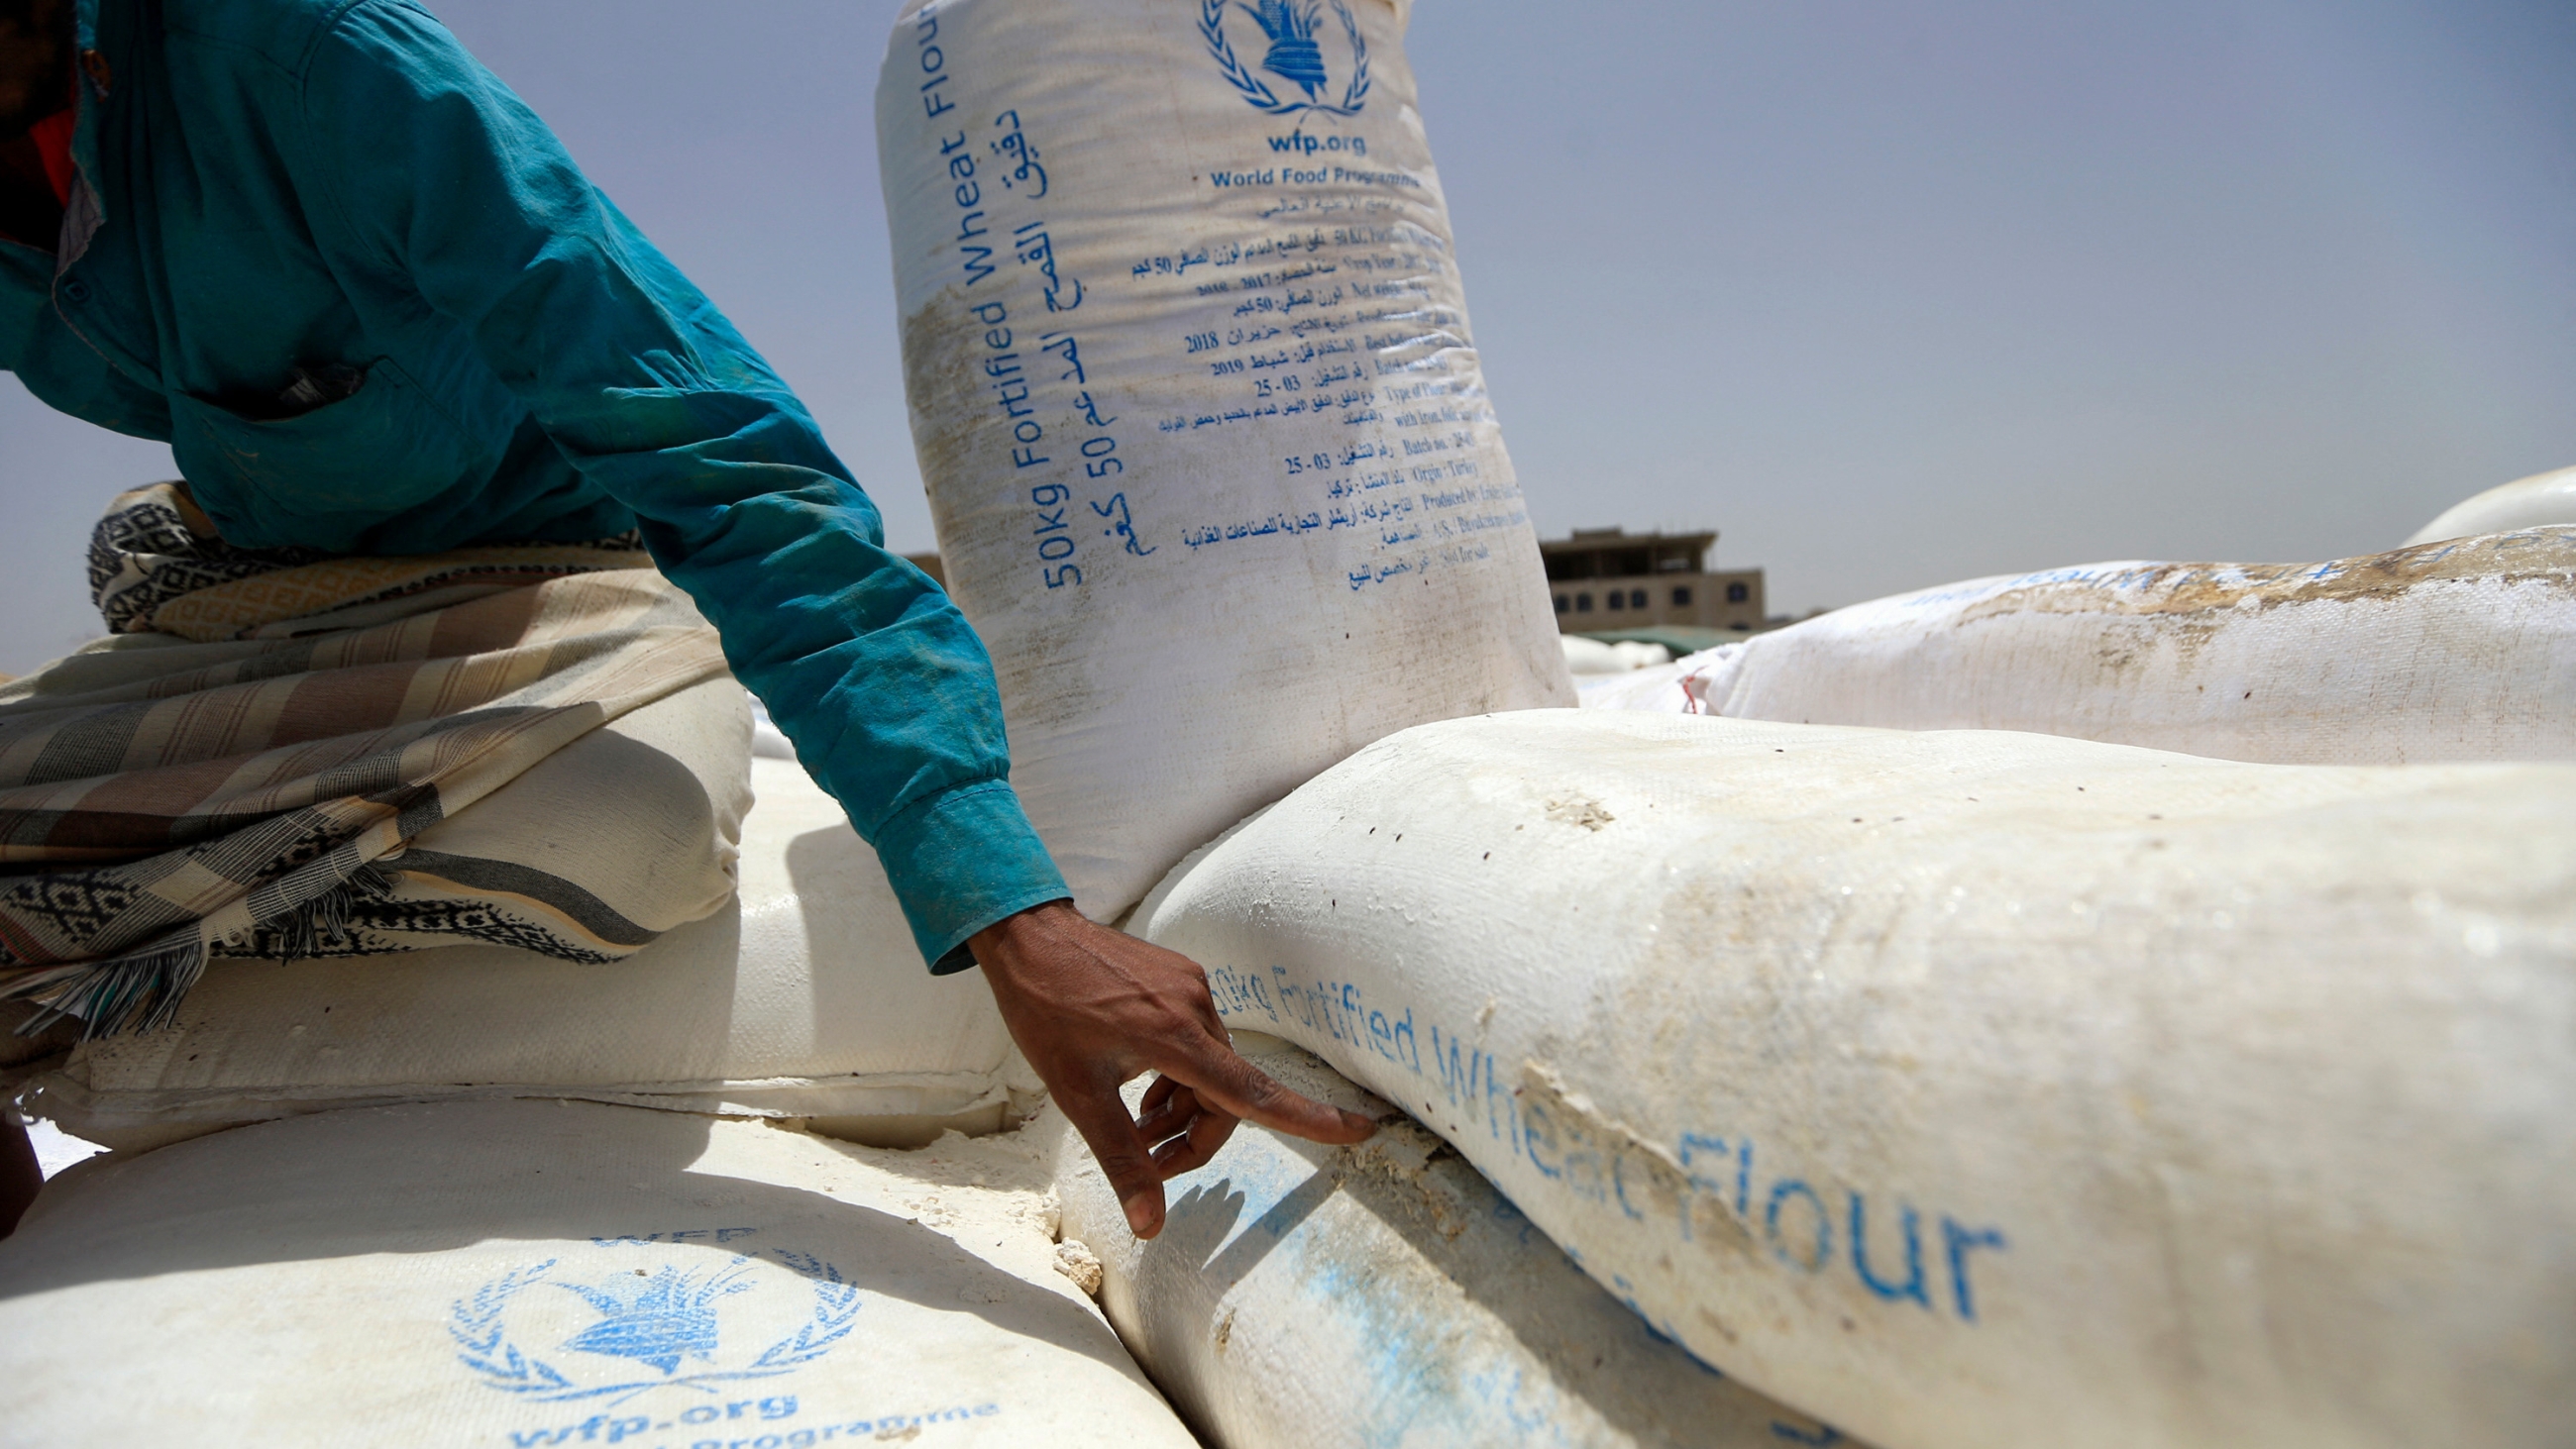 A Yemeni points to a flour bag from the World Food Organisation in the Yemeni capital Sanaa on 23 June 2019 (AFP)